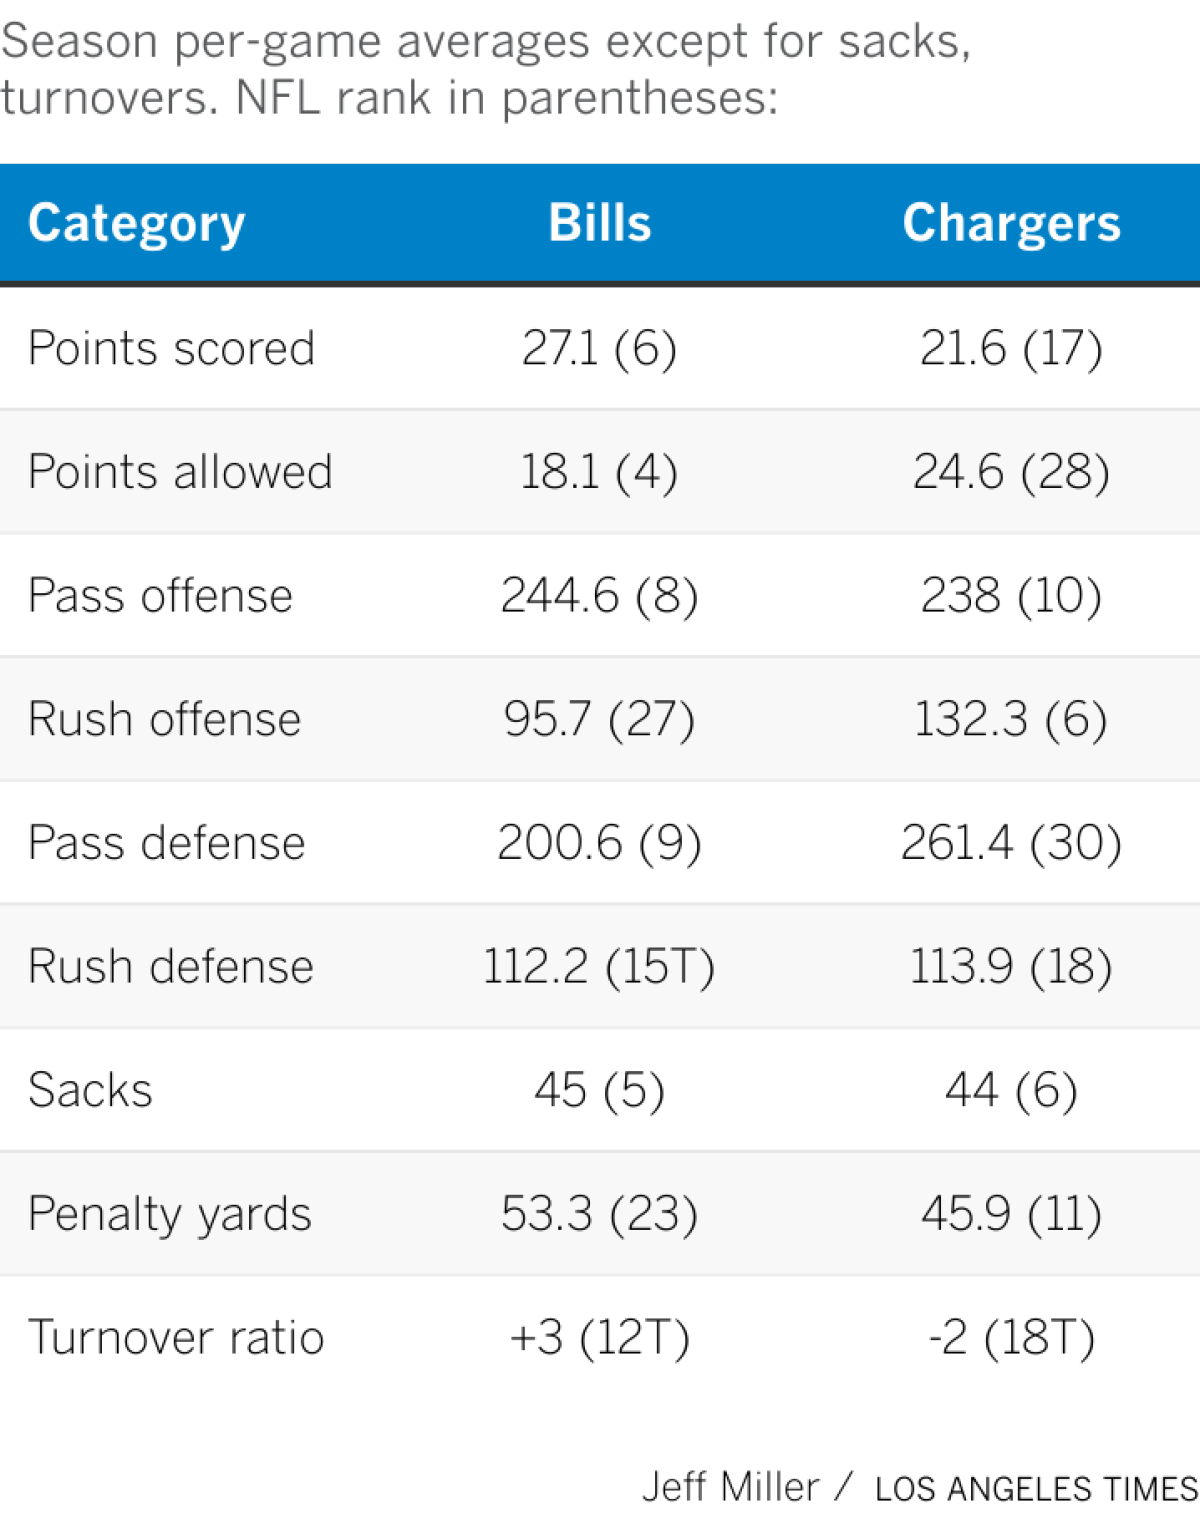 A chart comparing season stats for the Chargers and Bills.